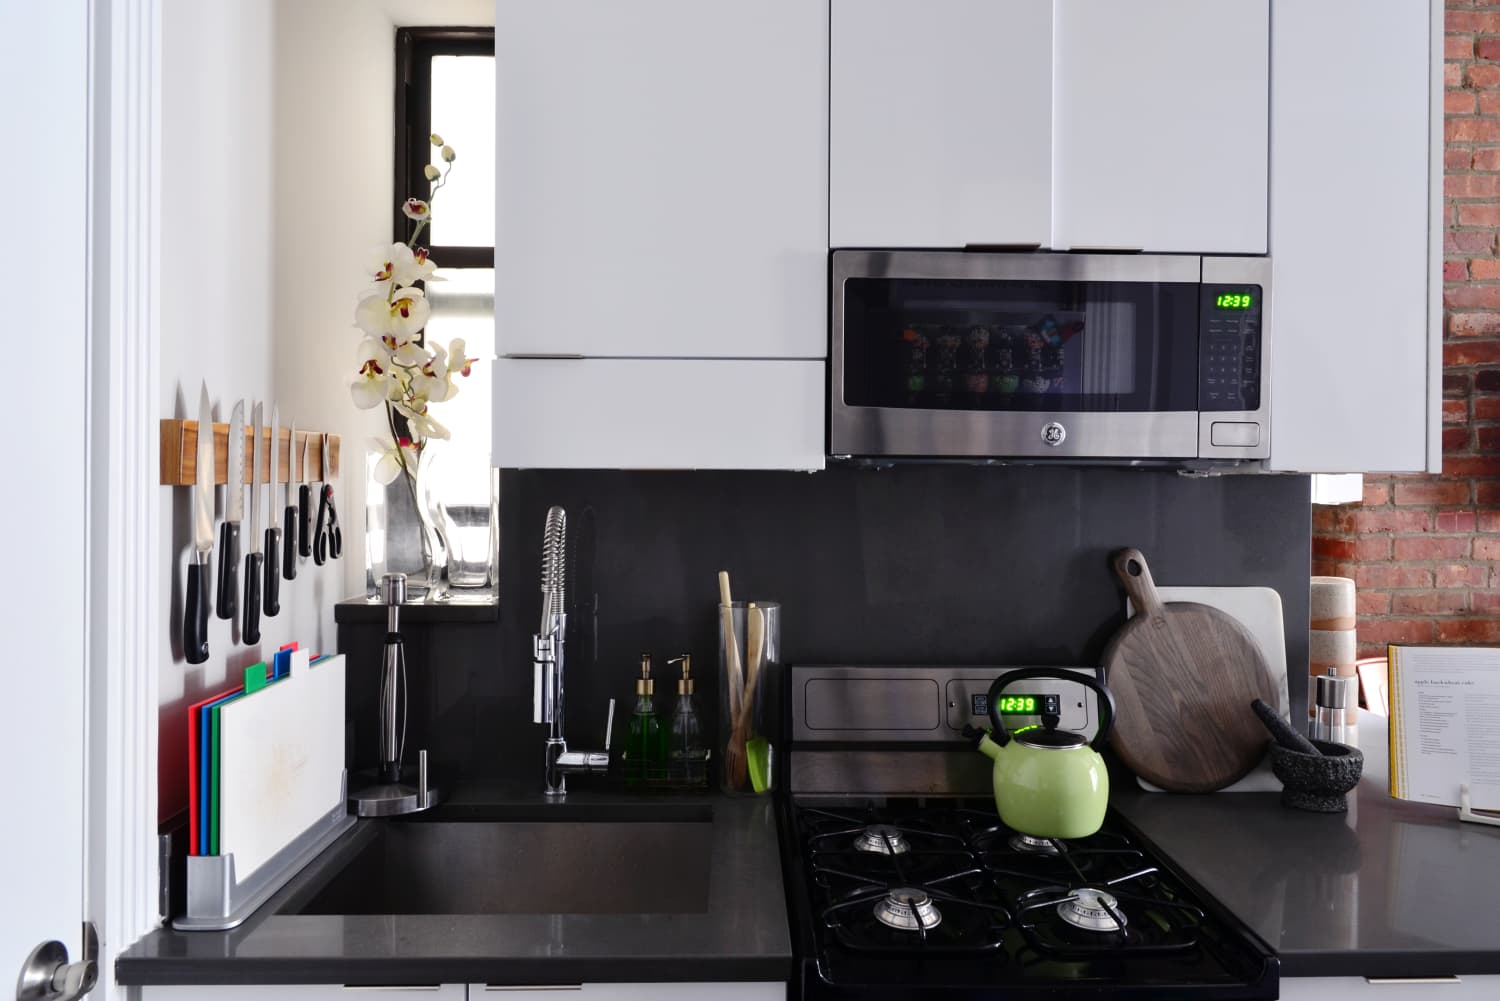 Well Designed Compact Appliances for Small Kitchens | Apartment Therapy